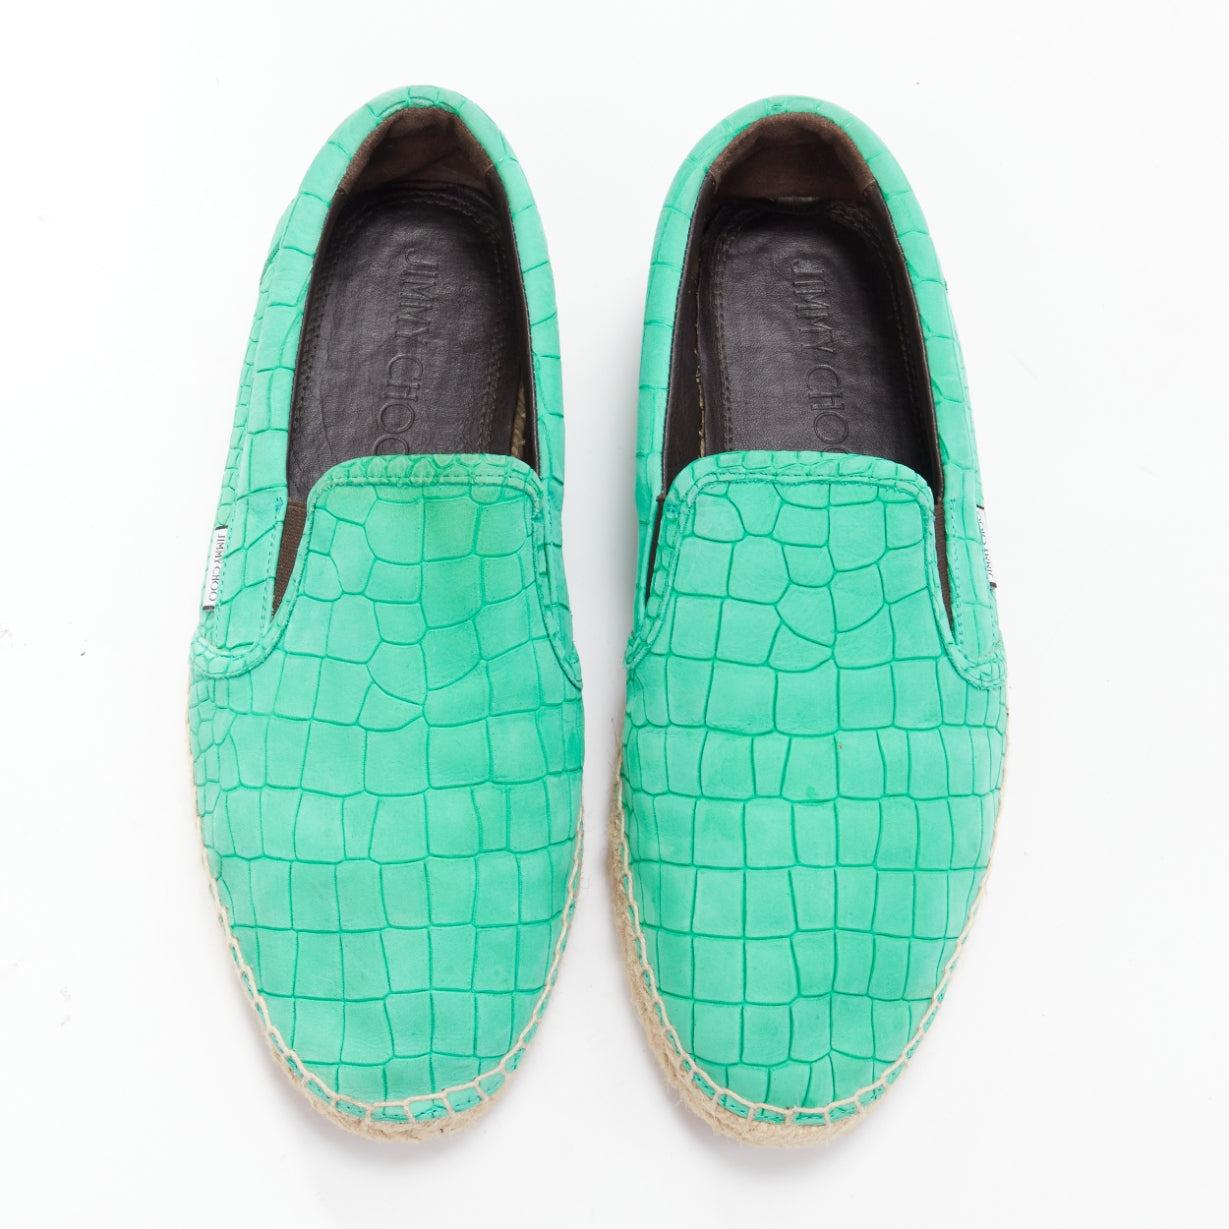 JIMMY CHOO Vlad mint green embossed scaled leather espadrilles EU42
Reference: JSLE/A00088
Brand: Jimmy Choo
Model: Vlad
Material: Leather
Color: Green, Beige
Pattern: Animal Print
Closure: Slip On
Lining: Brown Leather
Extra Details: Logo at sides